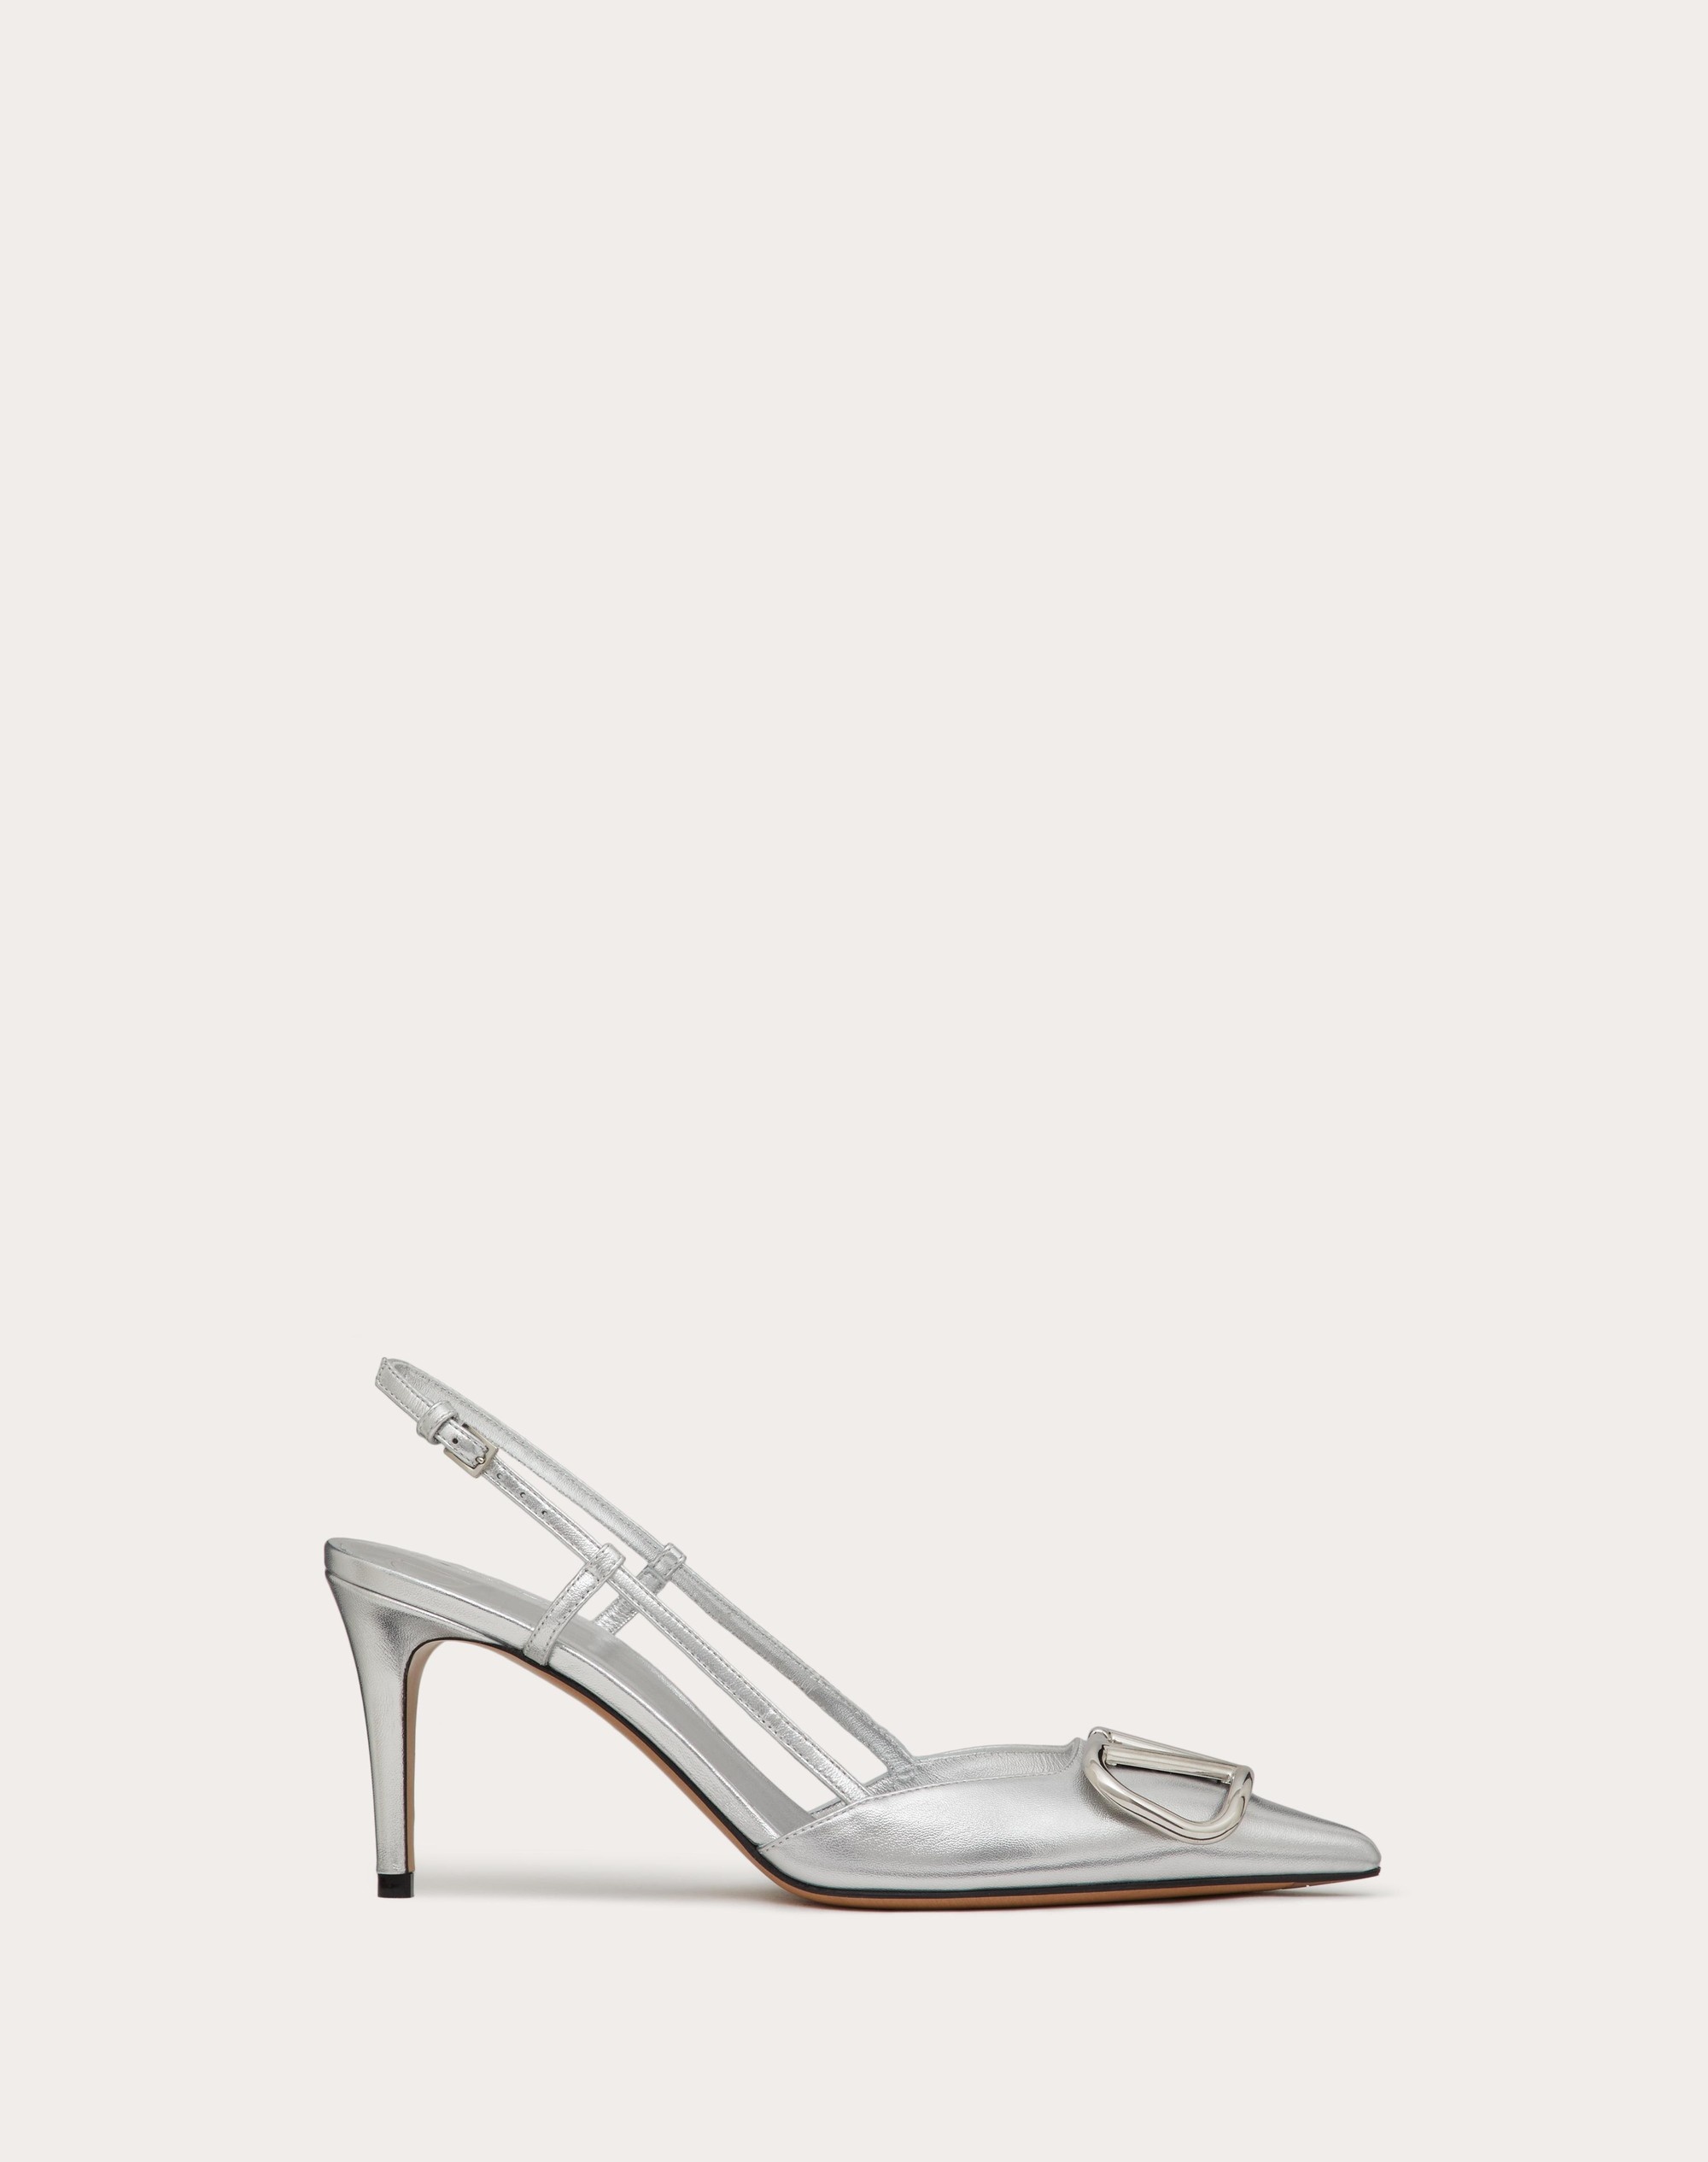 VLOGO SIGNATURE SLINGBACK PUMP IN LAMINATED NAPPA LEATHER 80MM - 1